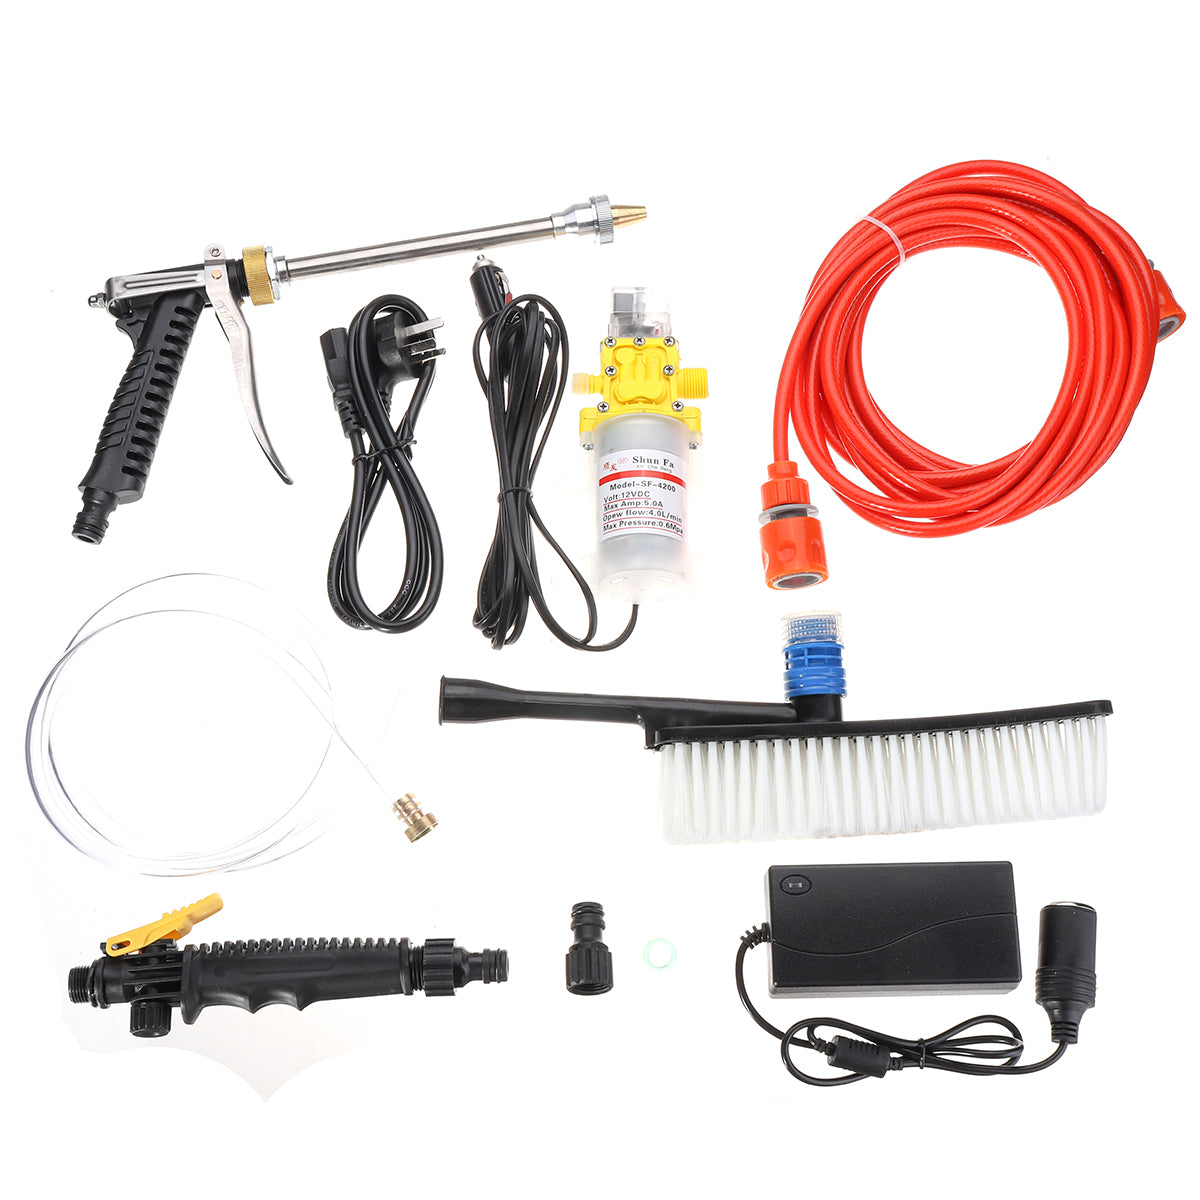 12V Car Interior Exterior Wash Cleaning Hairbrush Cleaner Tools Kit Portable - Auto GoShop